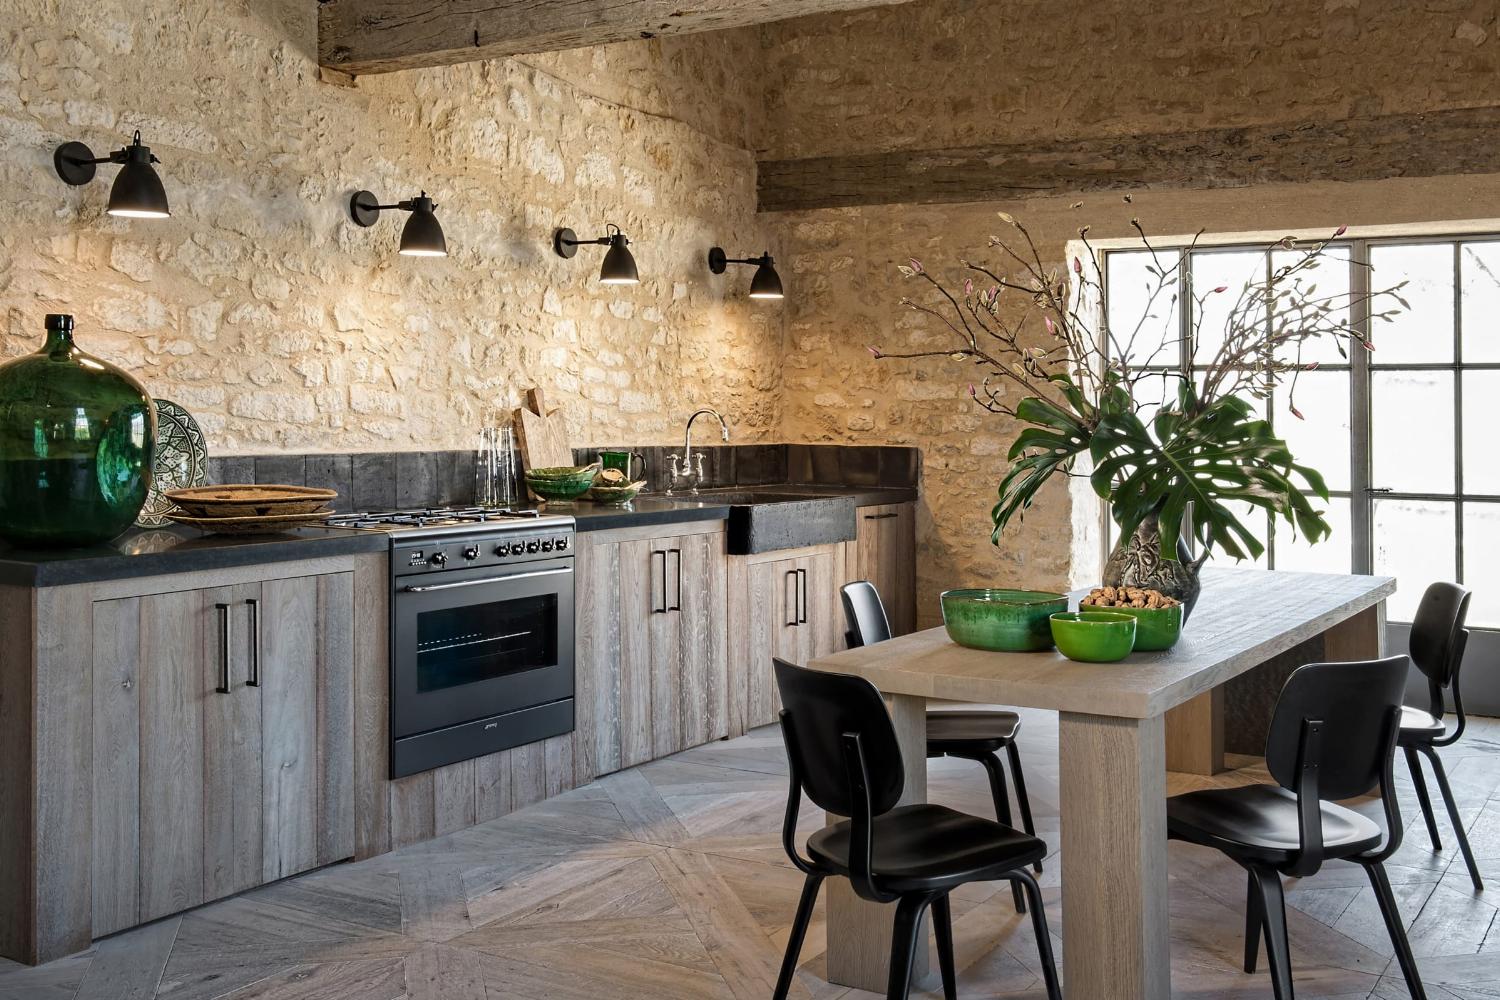 Kitchen | Holiday cottage in South West France